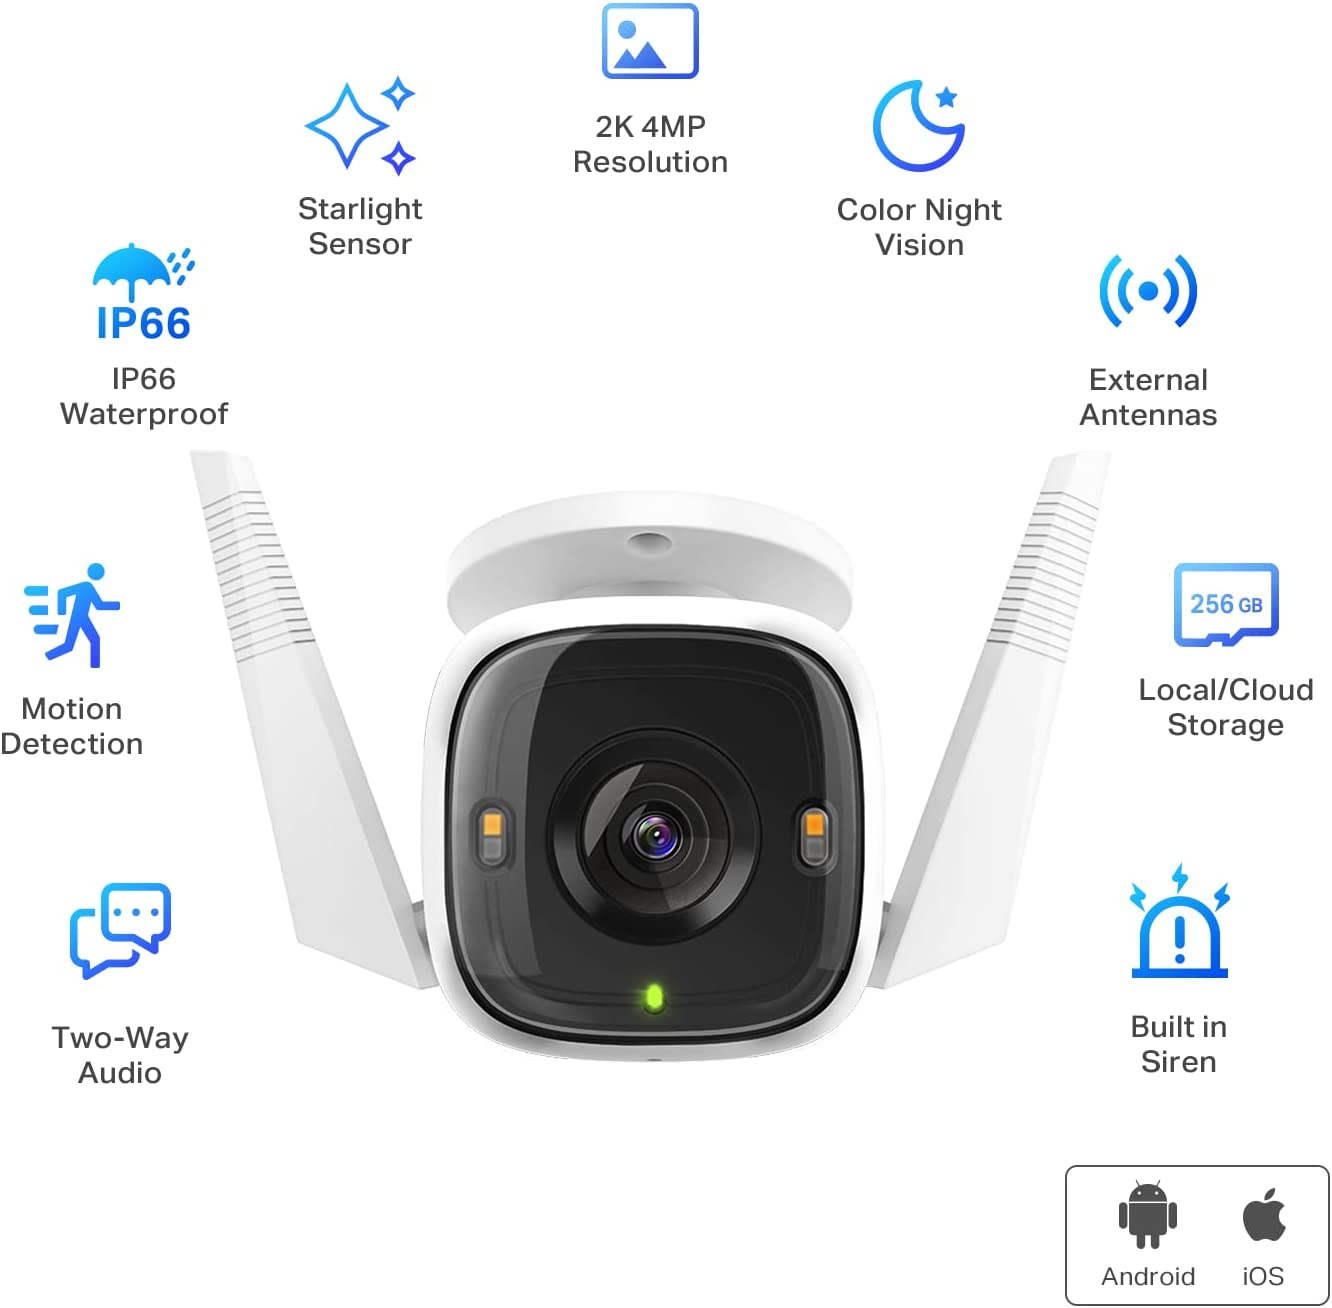 TP-Link Tapo 2K QHD Security Camera Outdoor Wired, Starlight Sensor for Color Night Vision, Free AI Detection, Works with Alexa & Google Home, Built-in Siren, Cloud/SD Card Storage (Tapo C320WS)